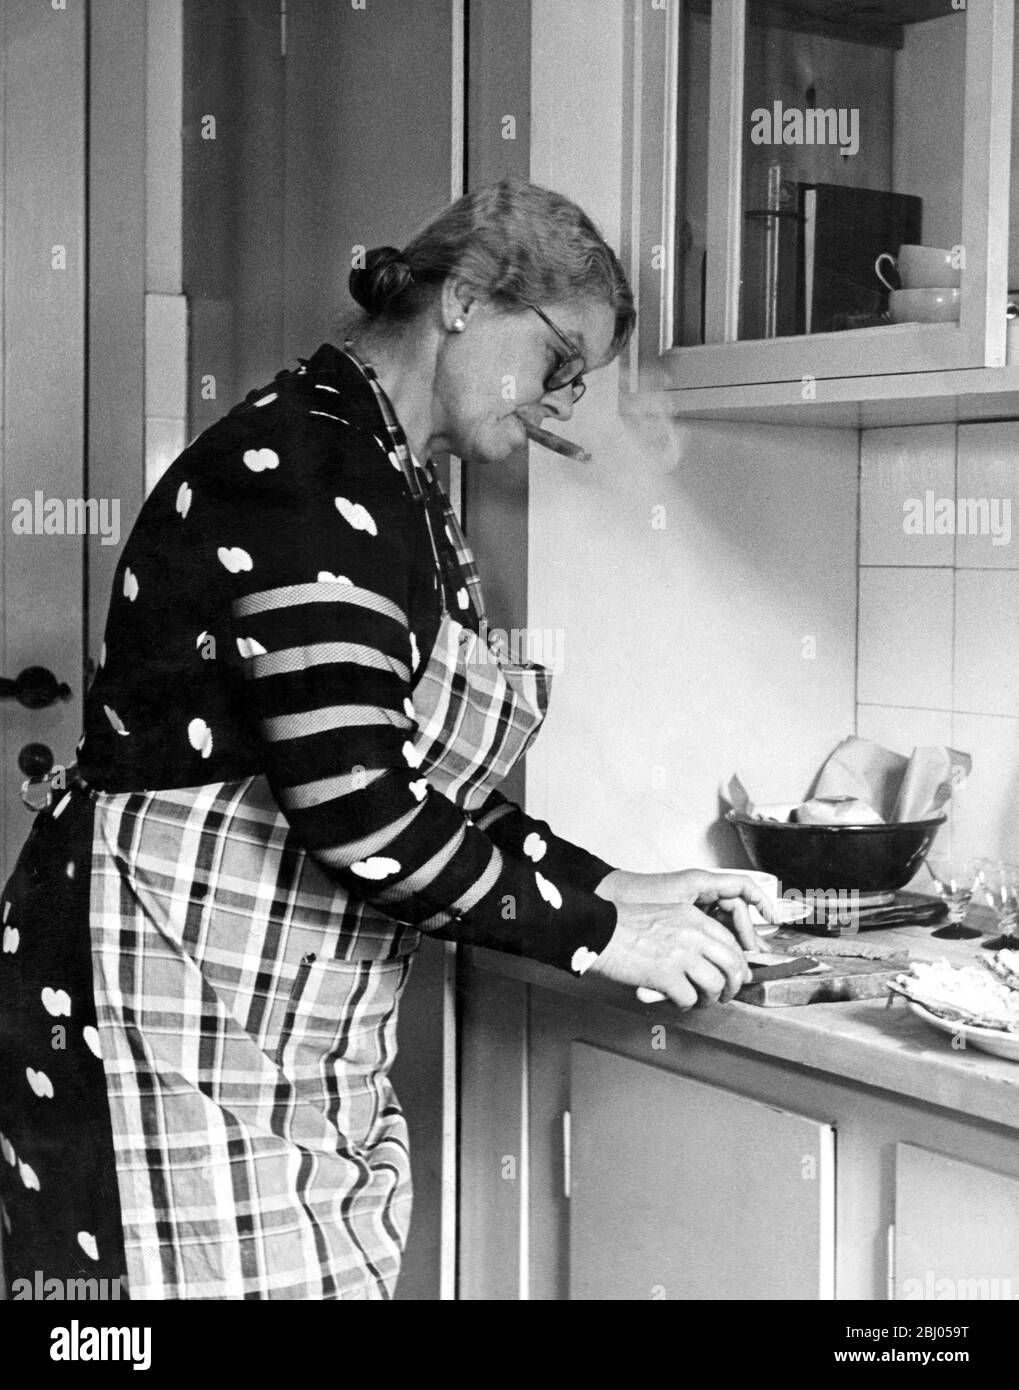 A houswife smoking a cigar in the kitchen - Denmark - c. 1950s Stock Photo